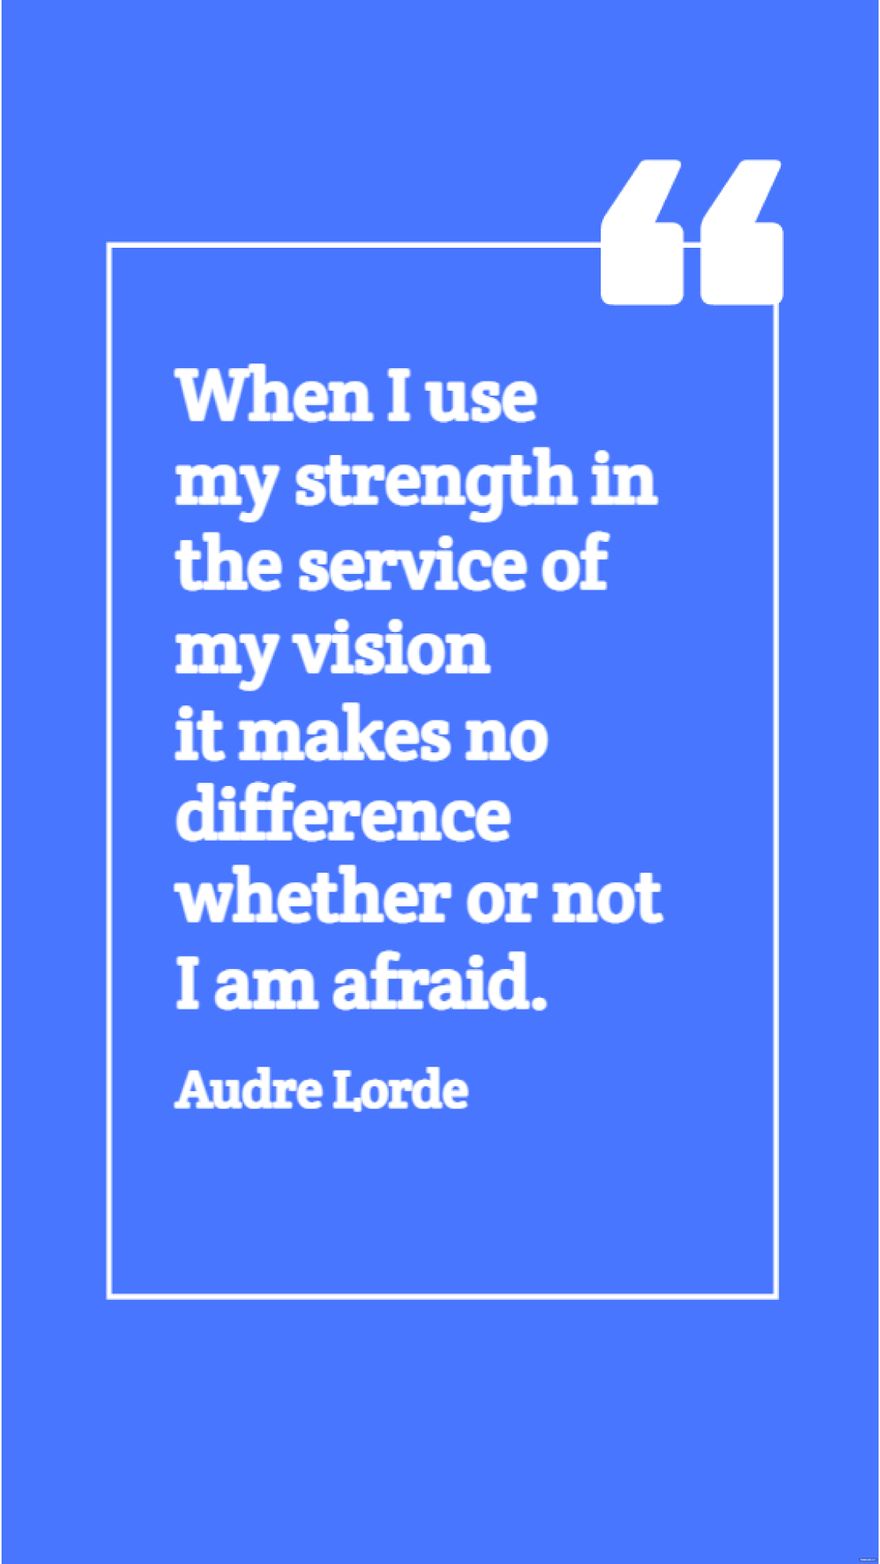 Audre Lorde - When I use my strength in the service of my vision it makes no difference whether or not I am afraid.